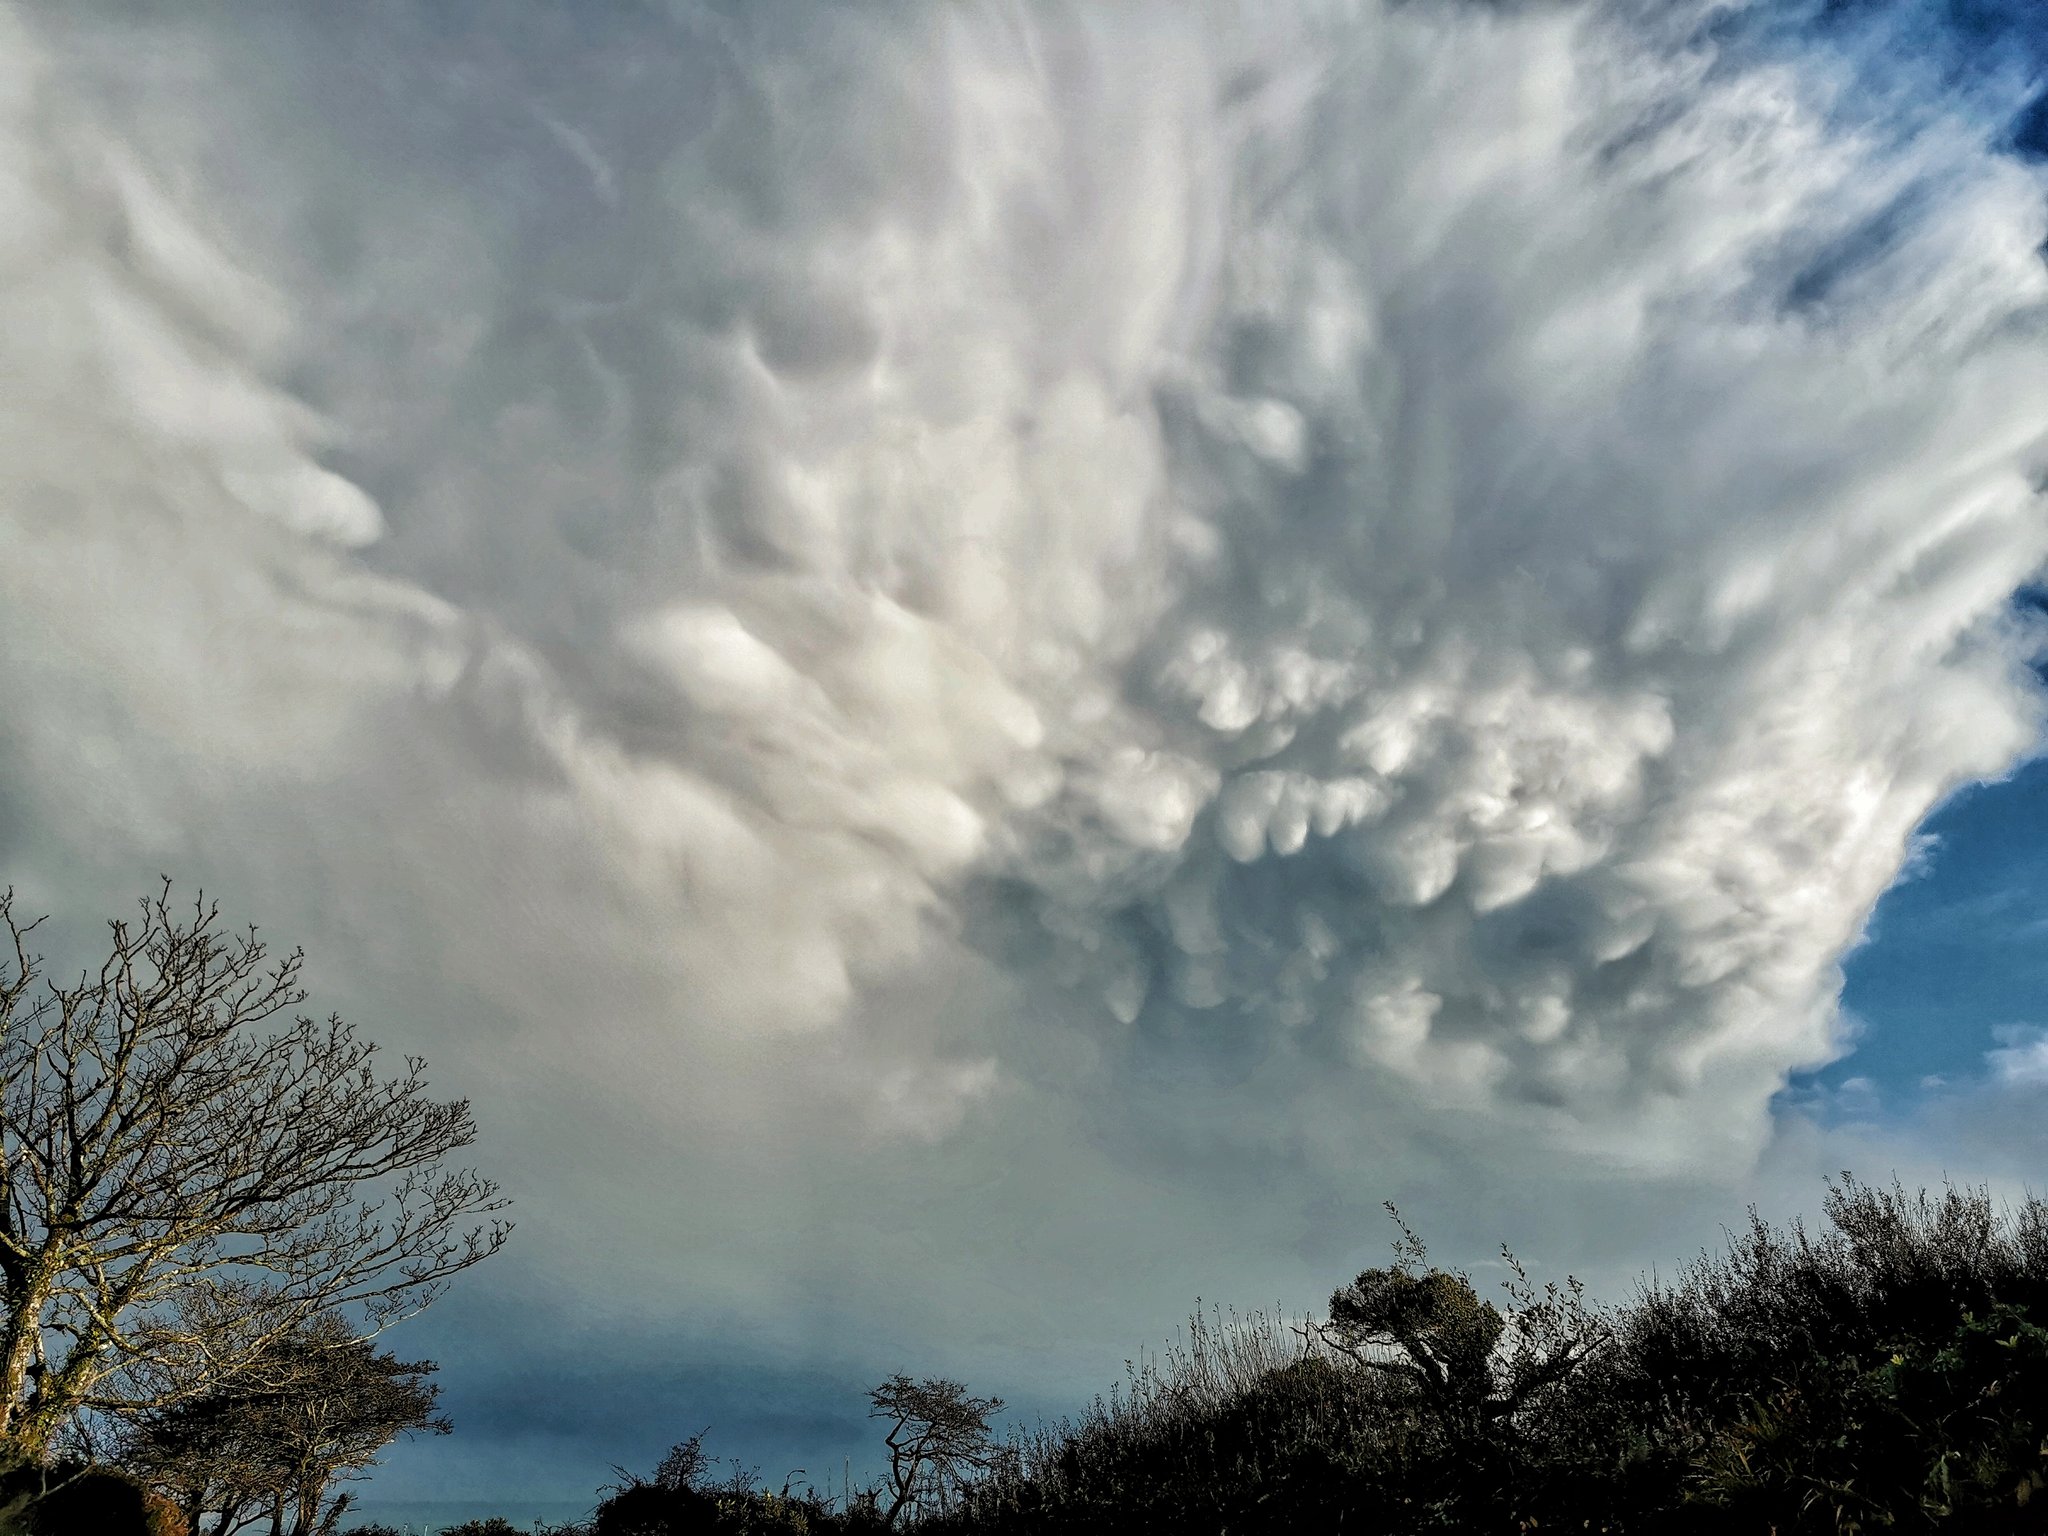 2nd Place Mammatus clouds from a passing downpour in Cornwall by Nick @Wx_NickJ